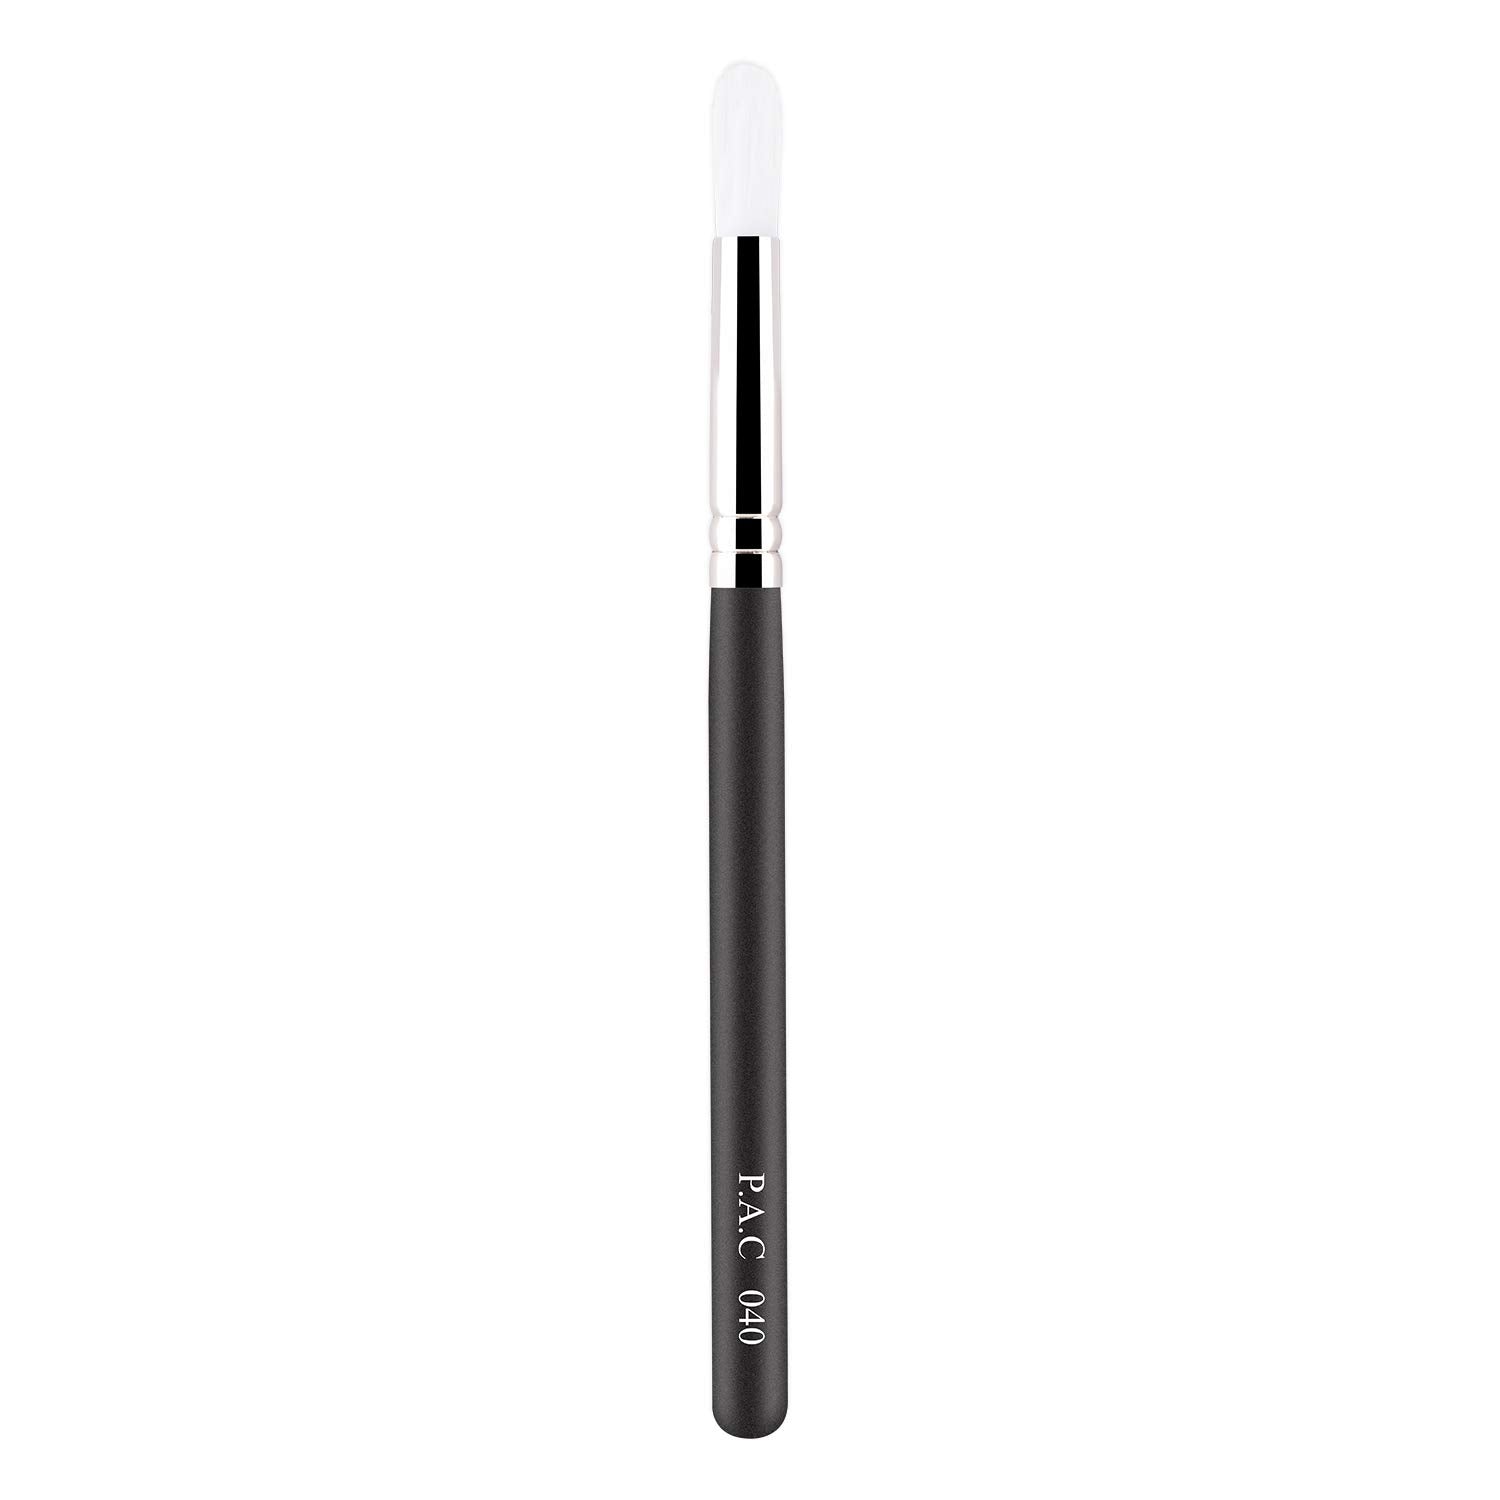 PAC Concealer Brush 040 PAC